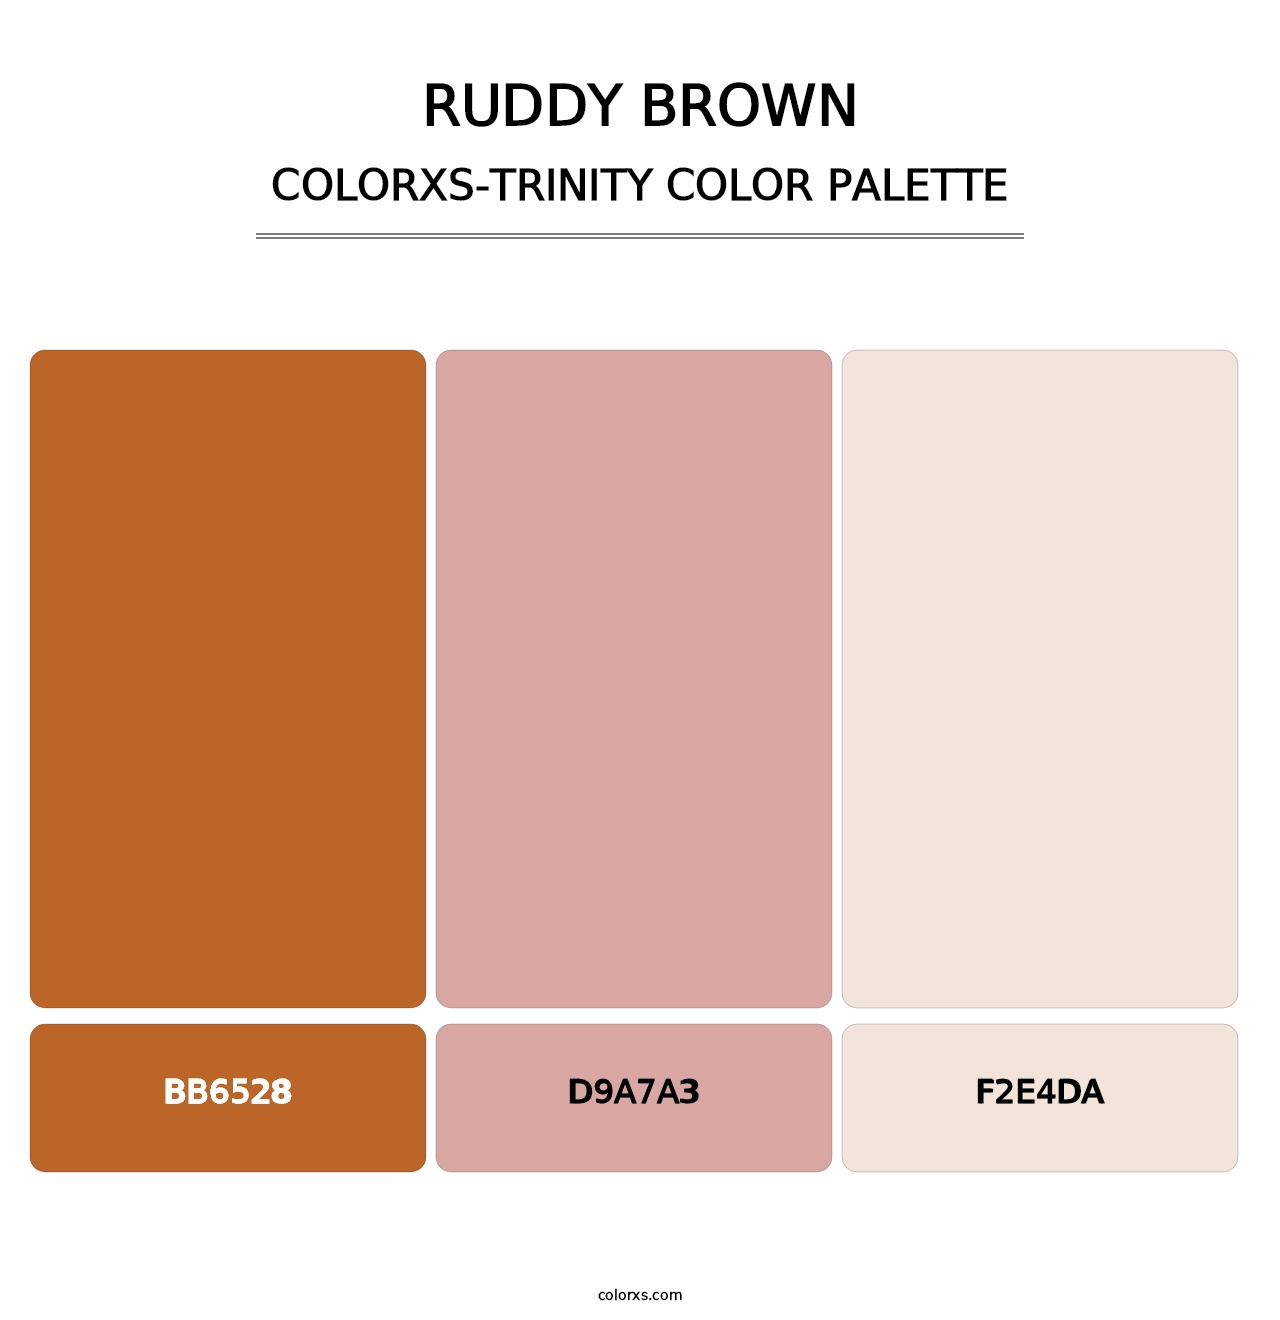 Ruddy Brown - Colorxs Trinity Palette